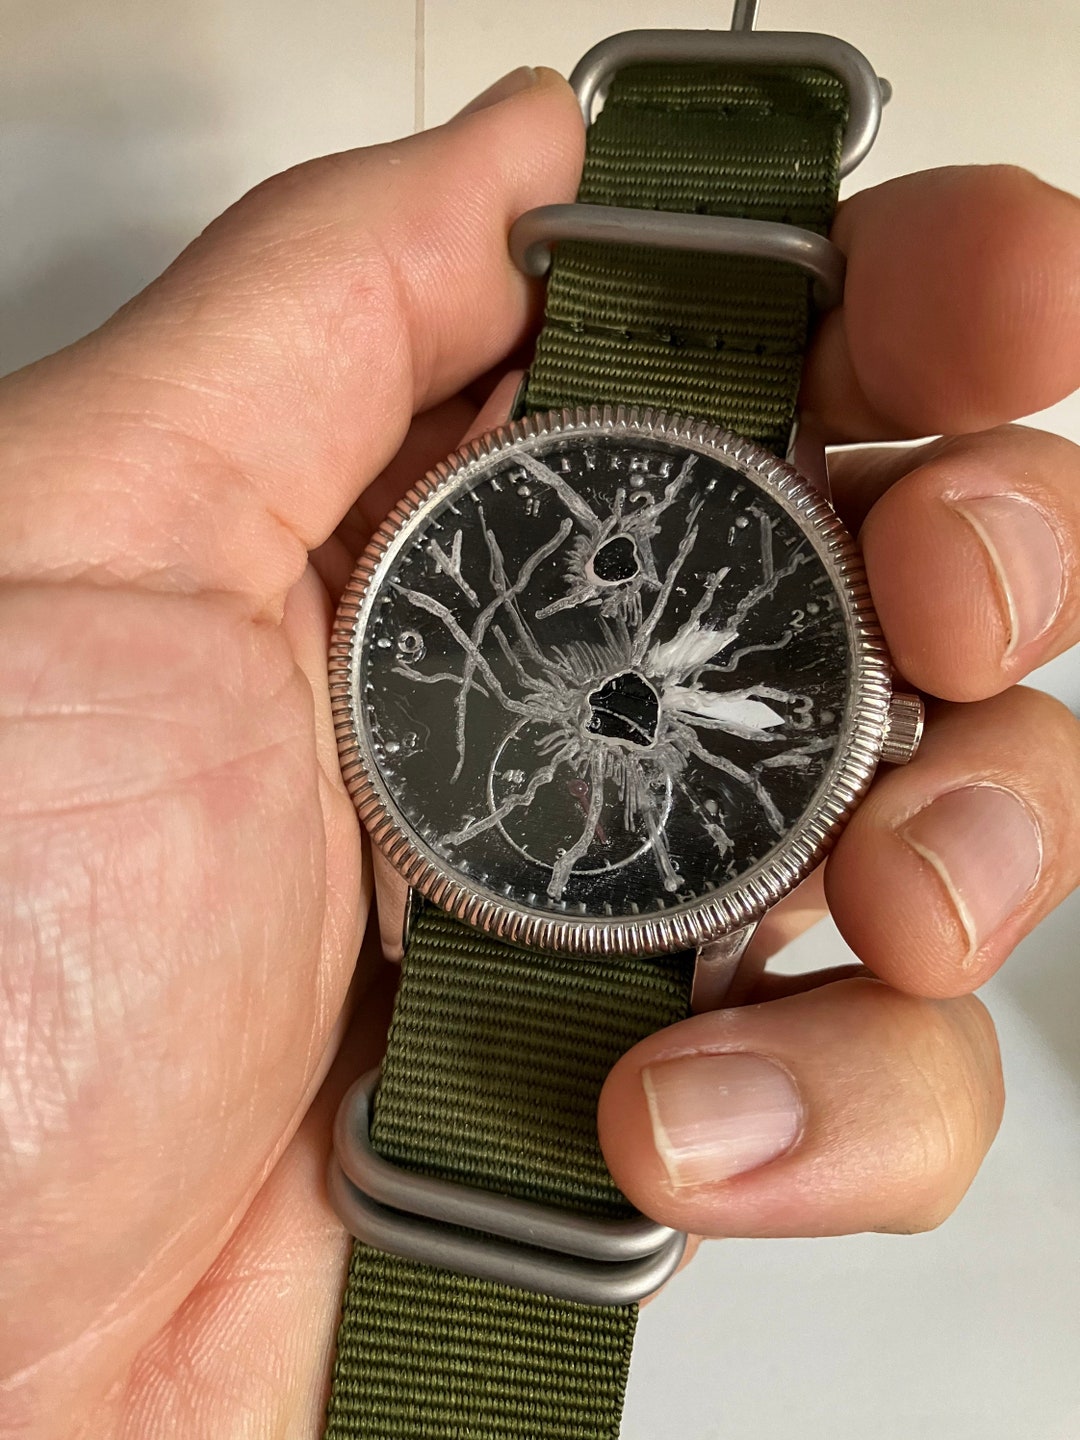 Looking for] Similar Wristwatch from The Last of Us Game : r/Watches